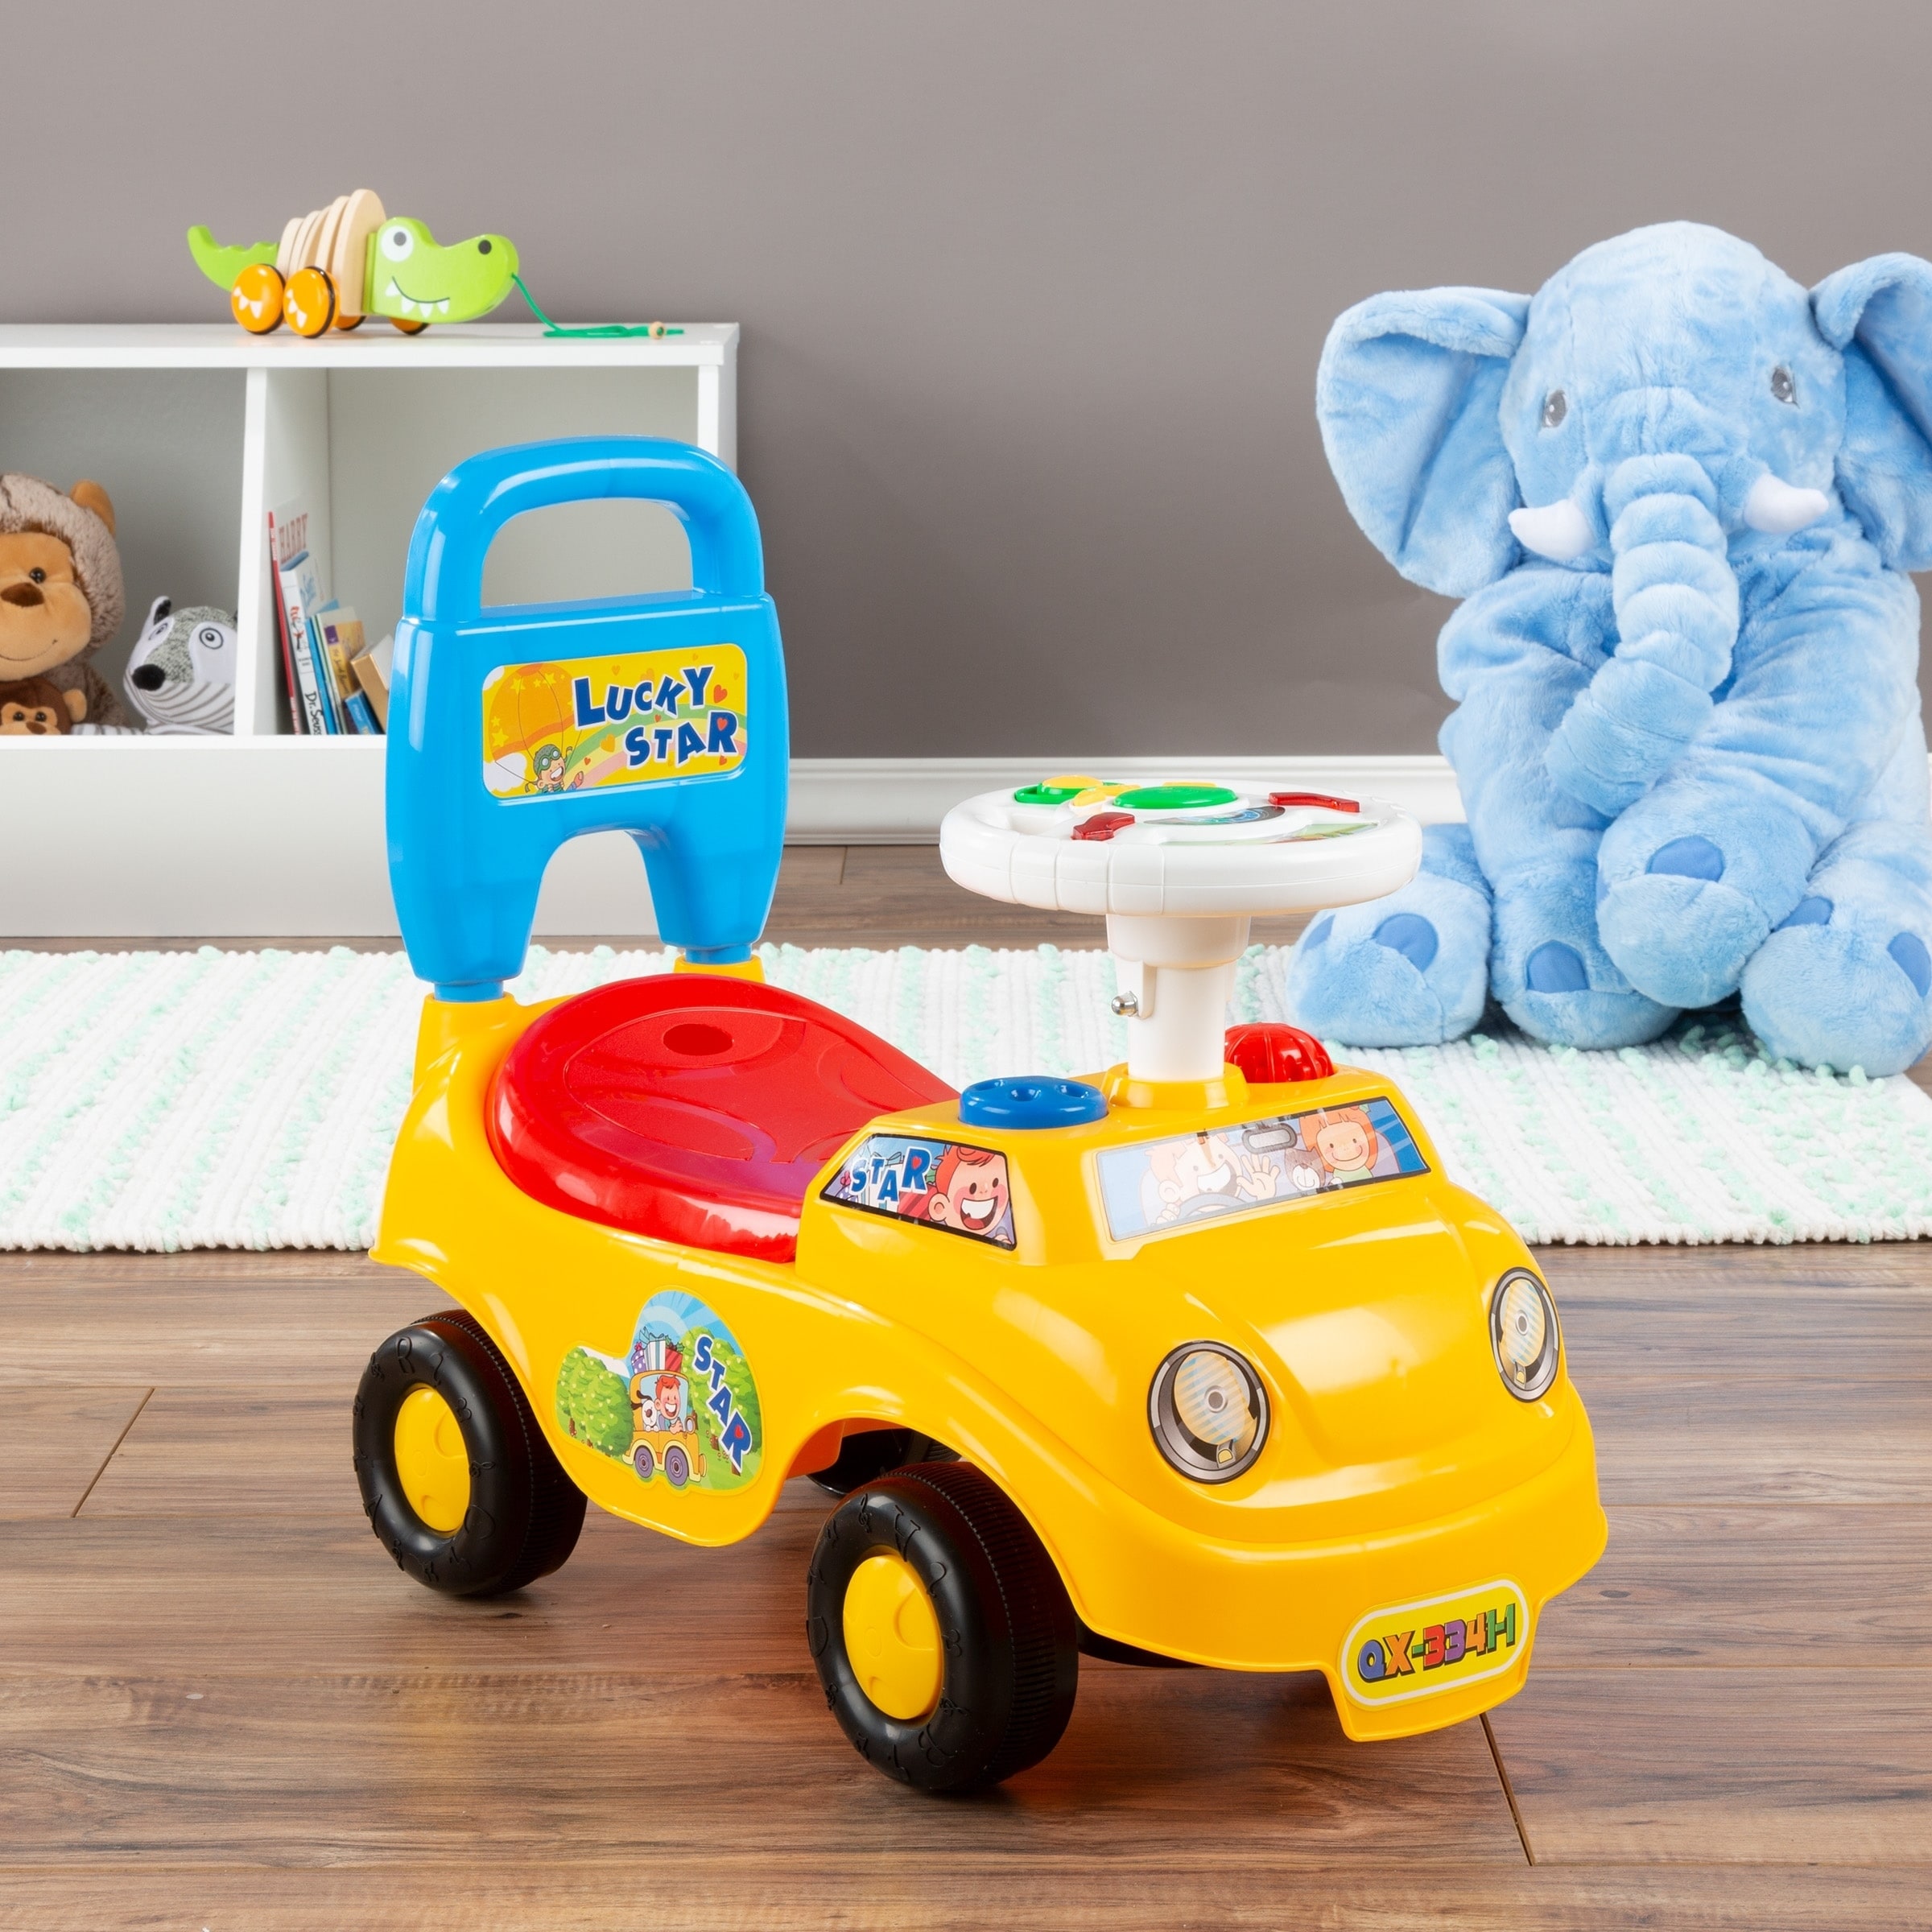 walk and ride toys for toddlers